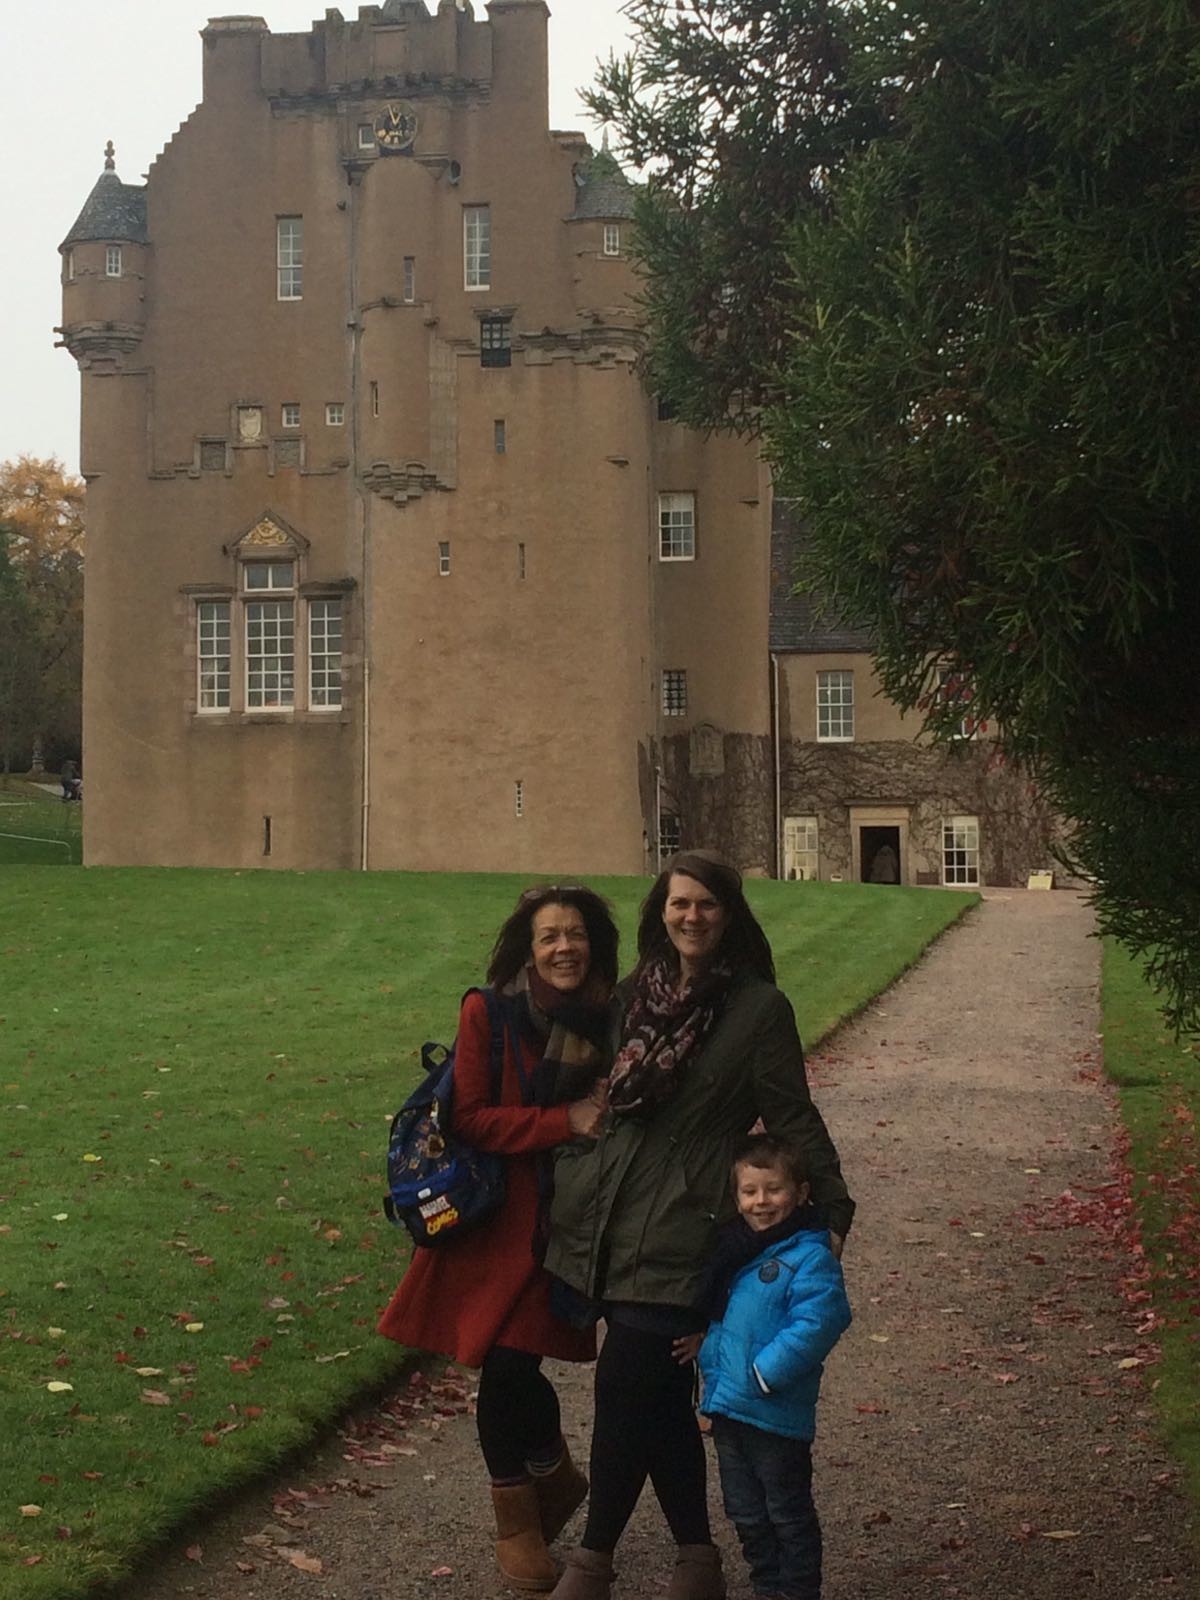 The family picture was taken at Crathes Castle